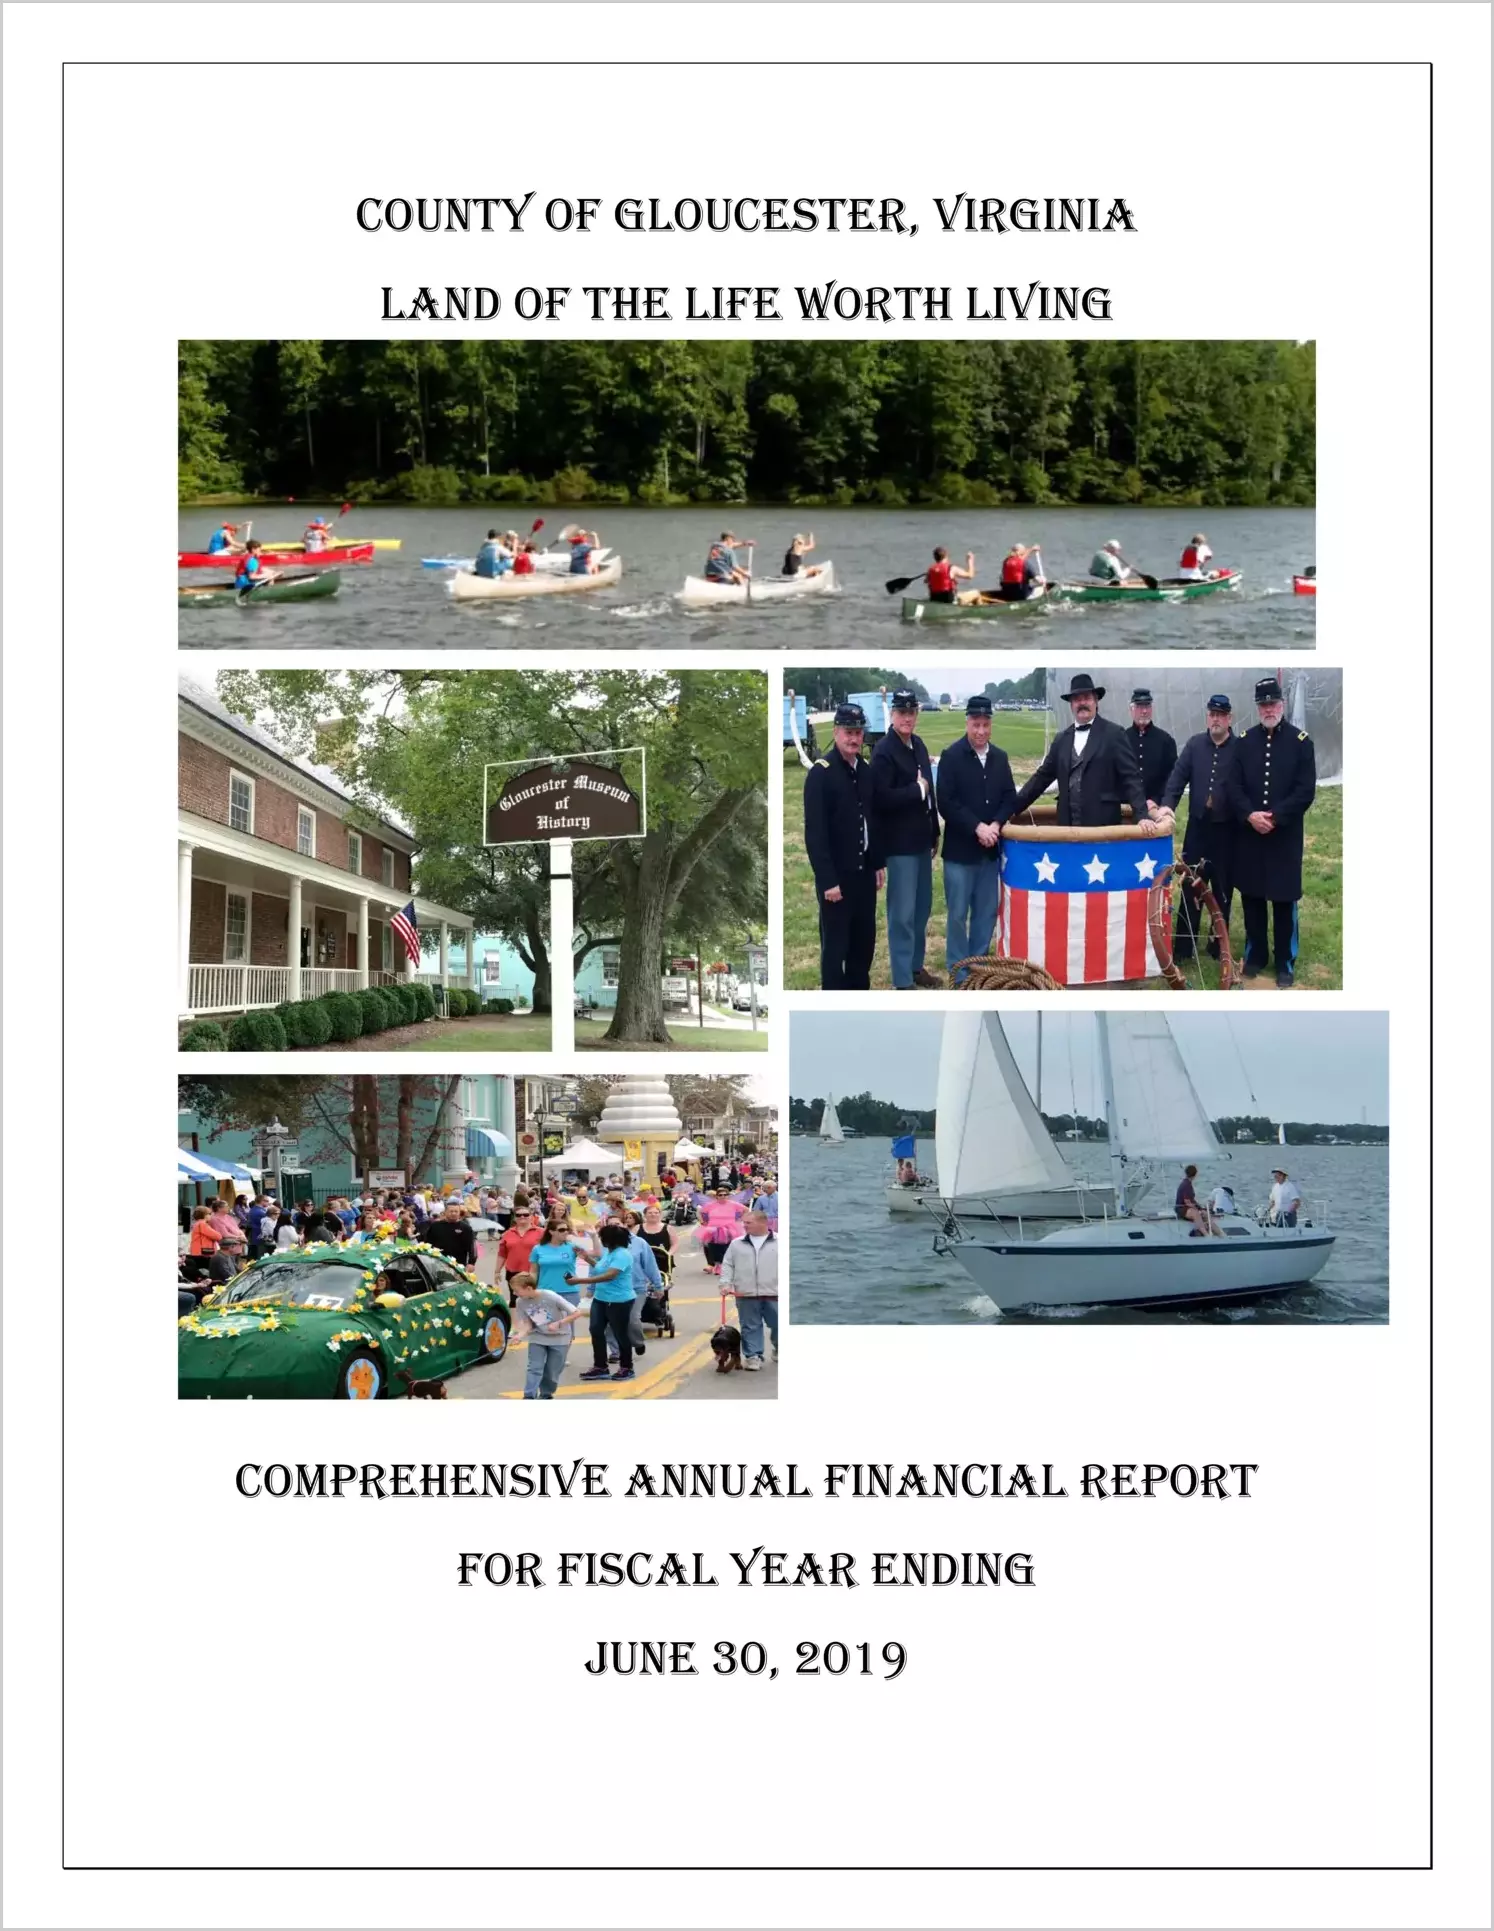 2019 Annual Financial Report for County of Gloucester